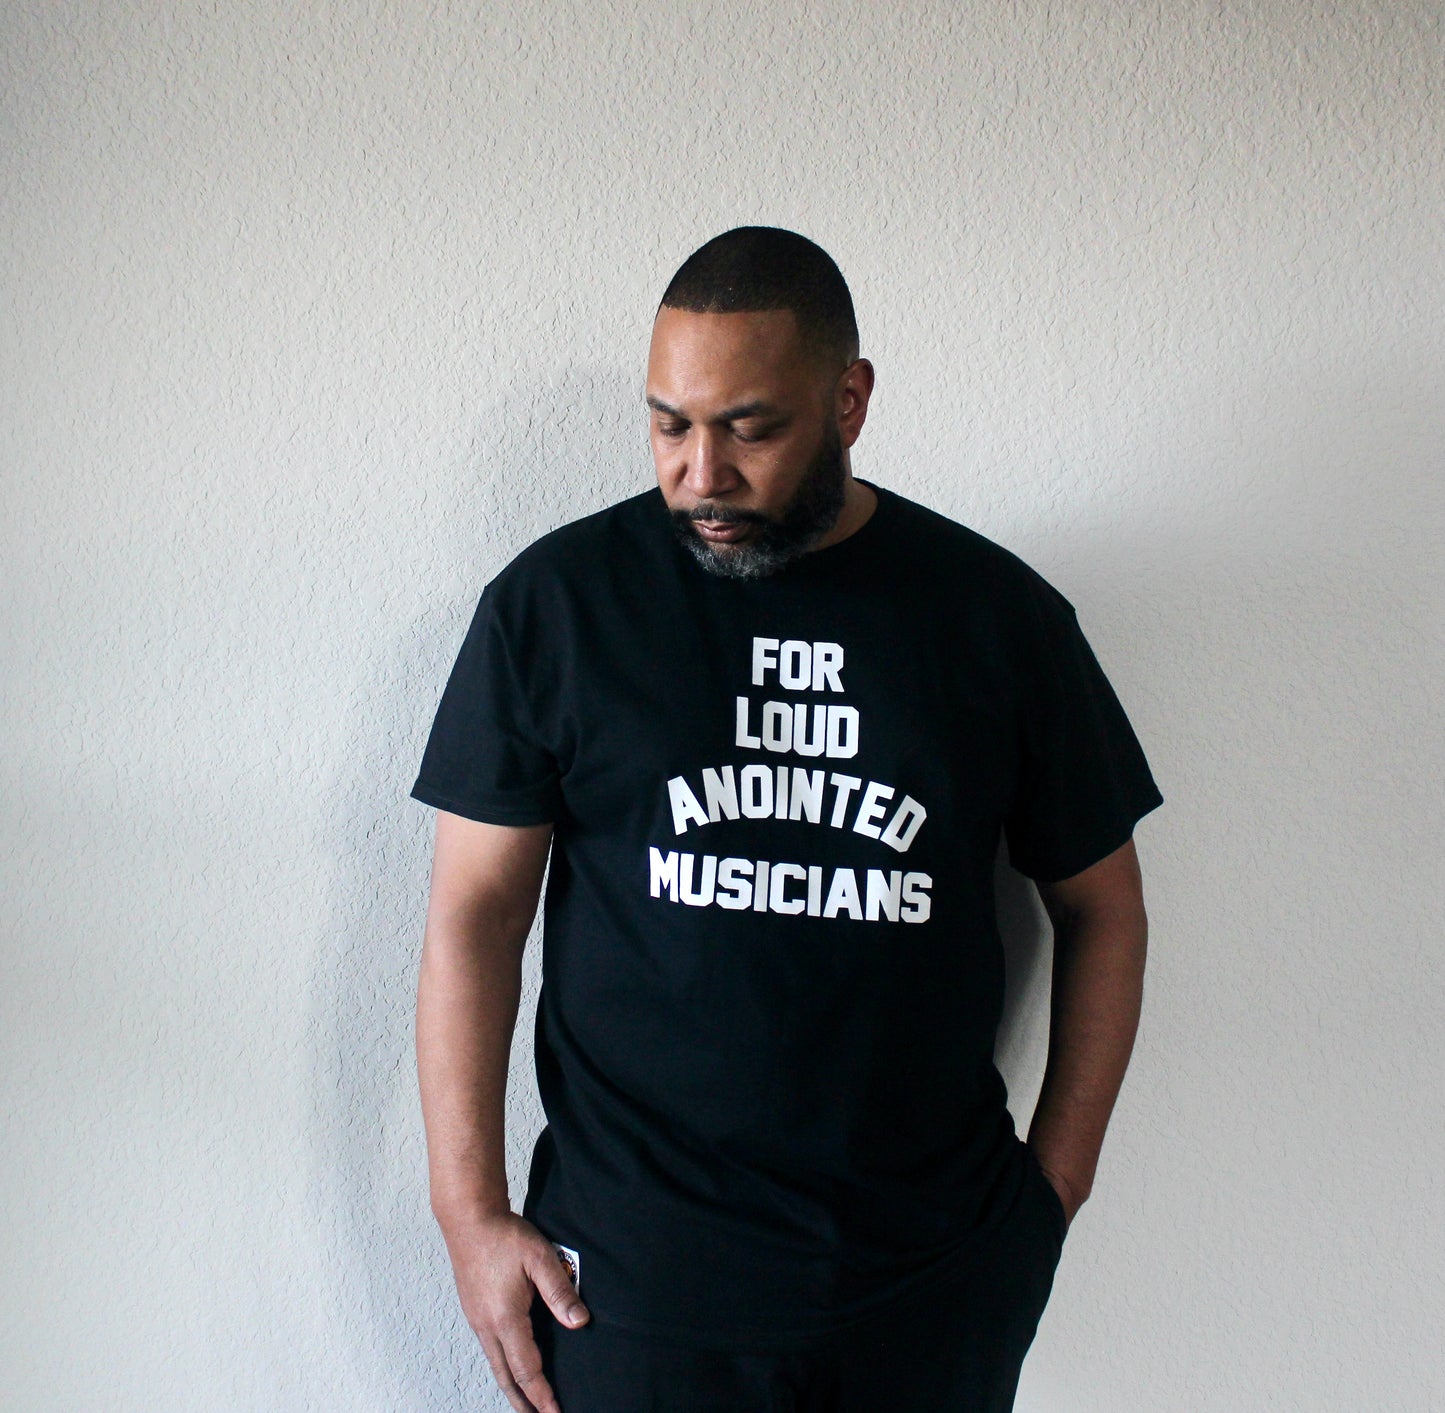 FOR LOUD ANOINTED MUSICIANS TEE